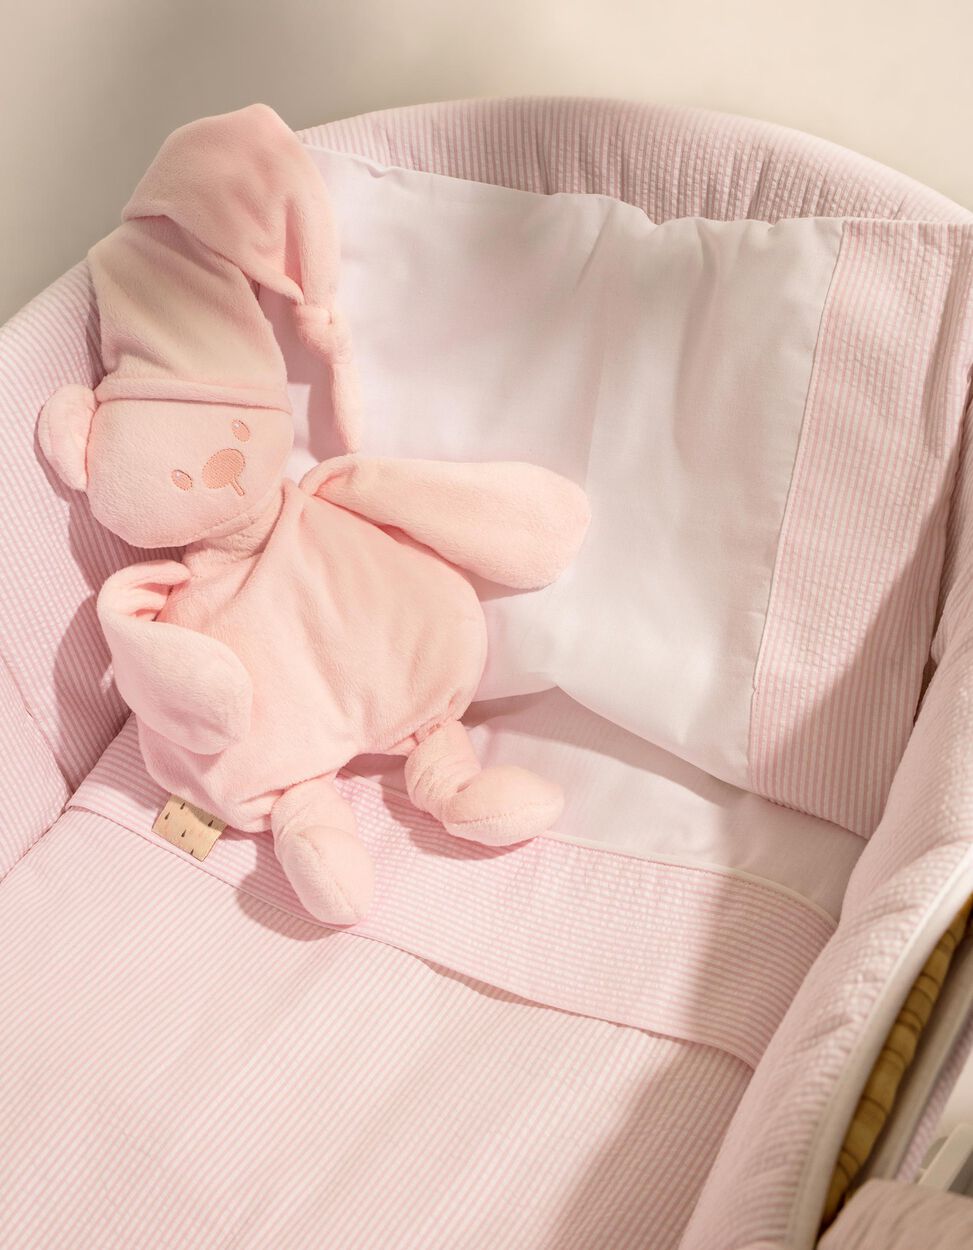 Sheet + Pillow Case 55x90Cm Essential Pink Zy Baby